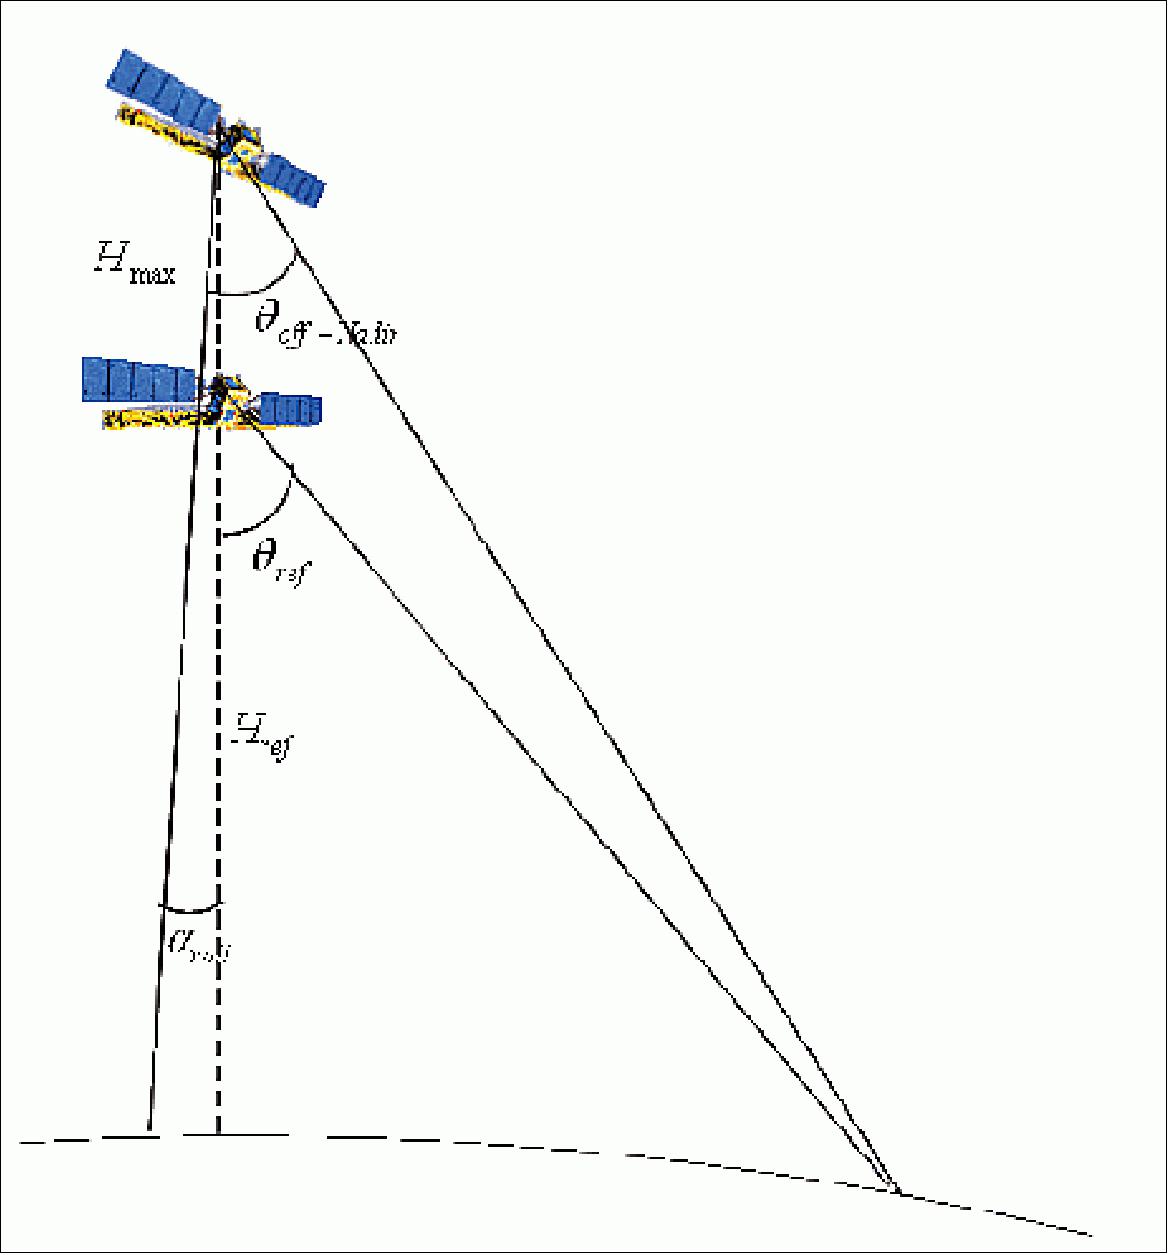 Schematic view of the Sentinel-1 roll-steering mode